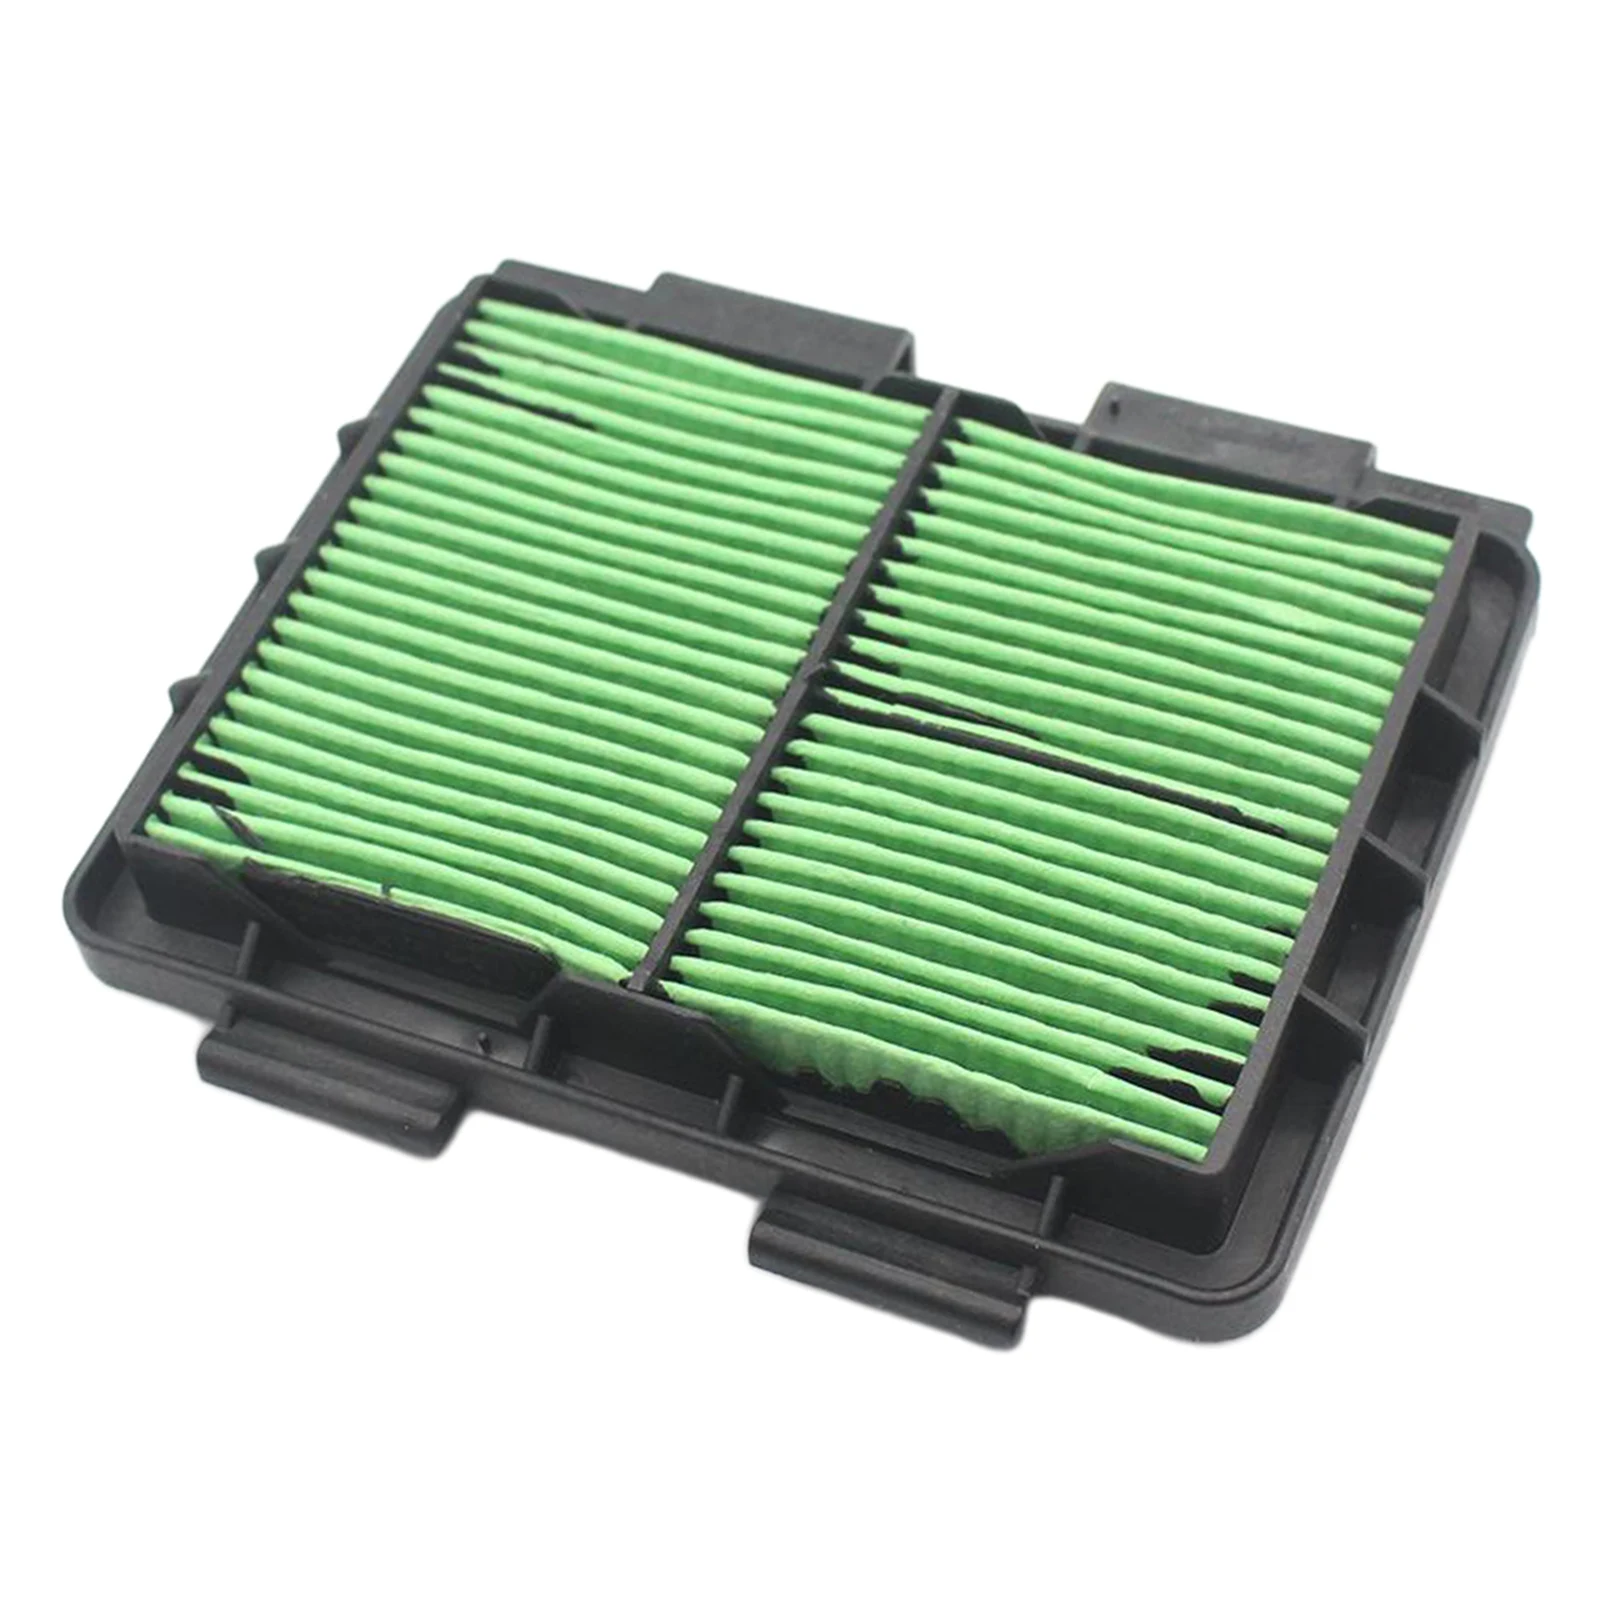 Motorbike Air Filter Cleaner for HONDA CRF250L CRF250 2013 -2016, High quality Durable Material